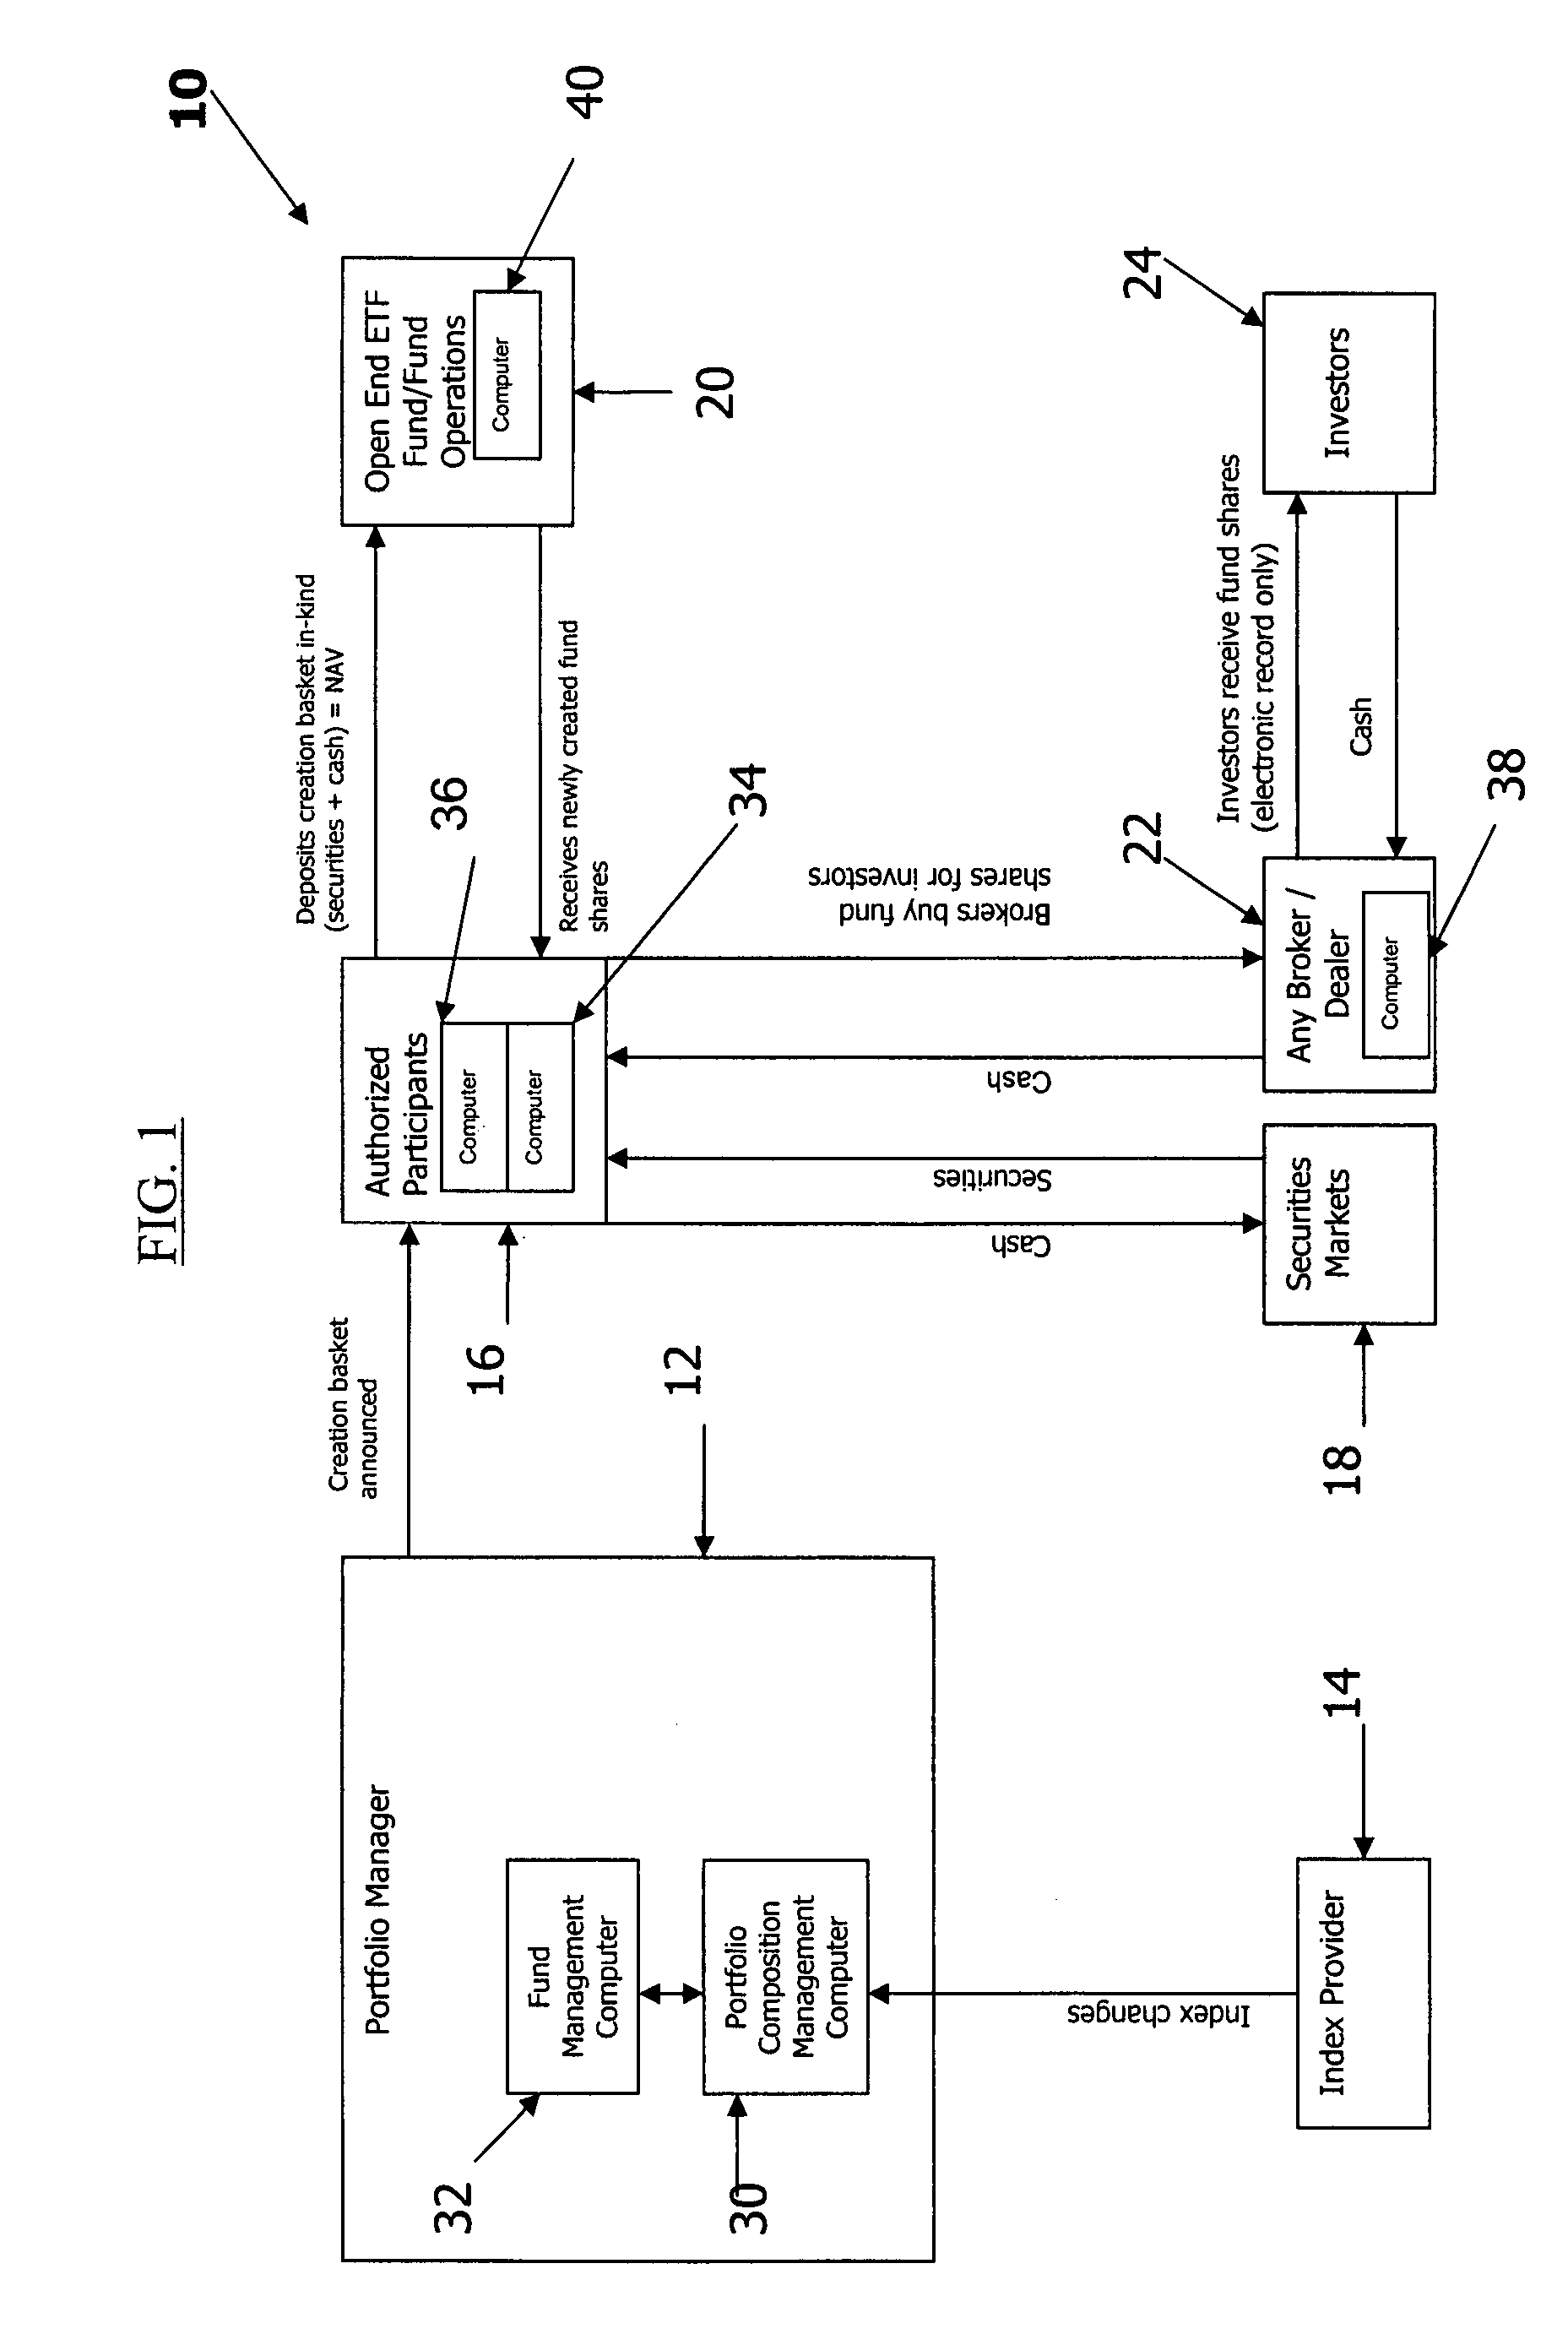 Methods, systems, and computer program products for trading financial instruments on an exchange